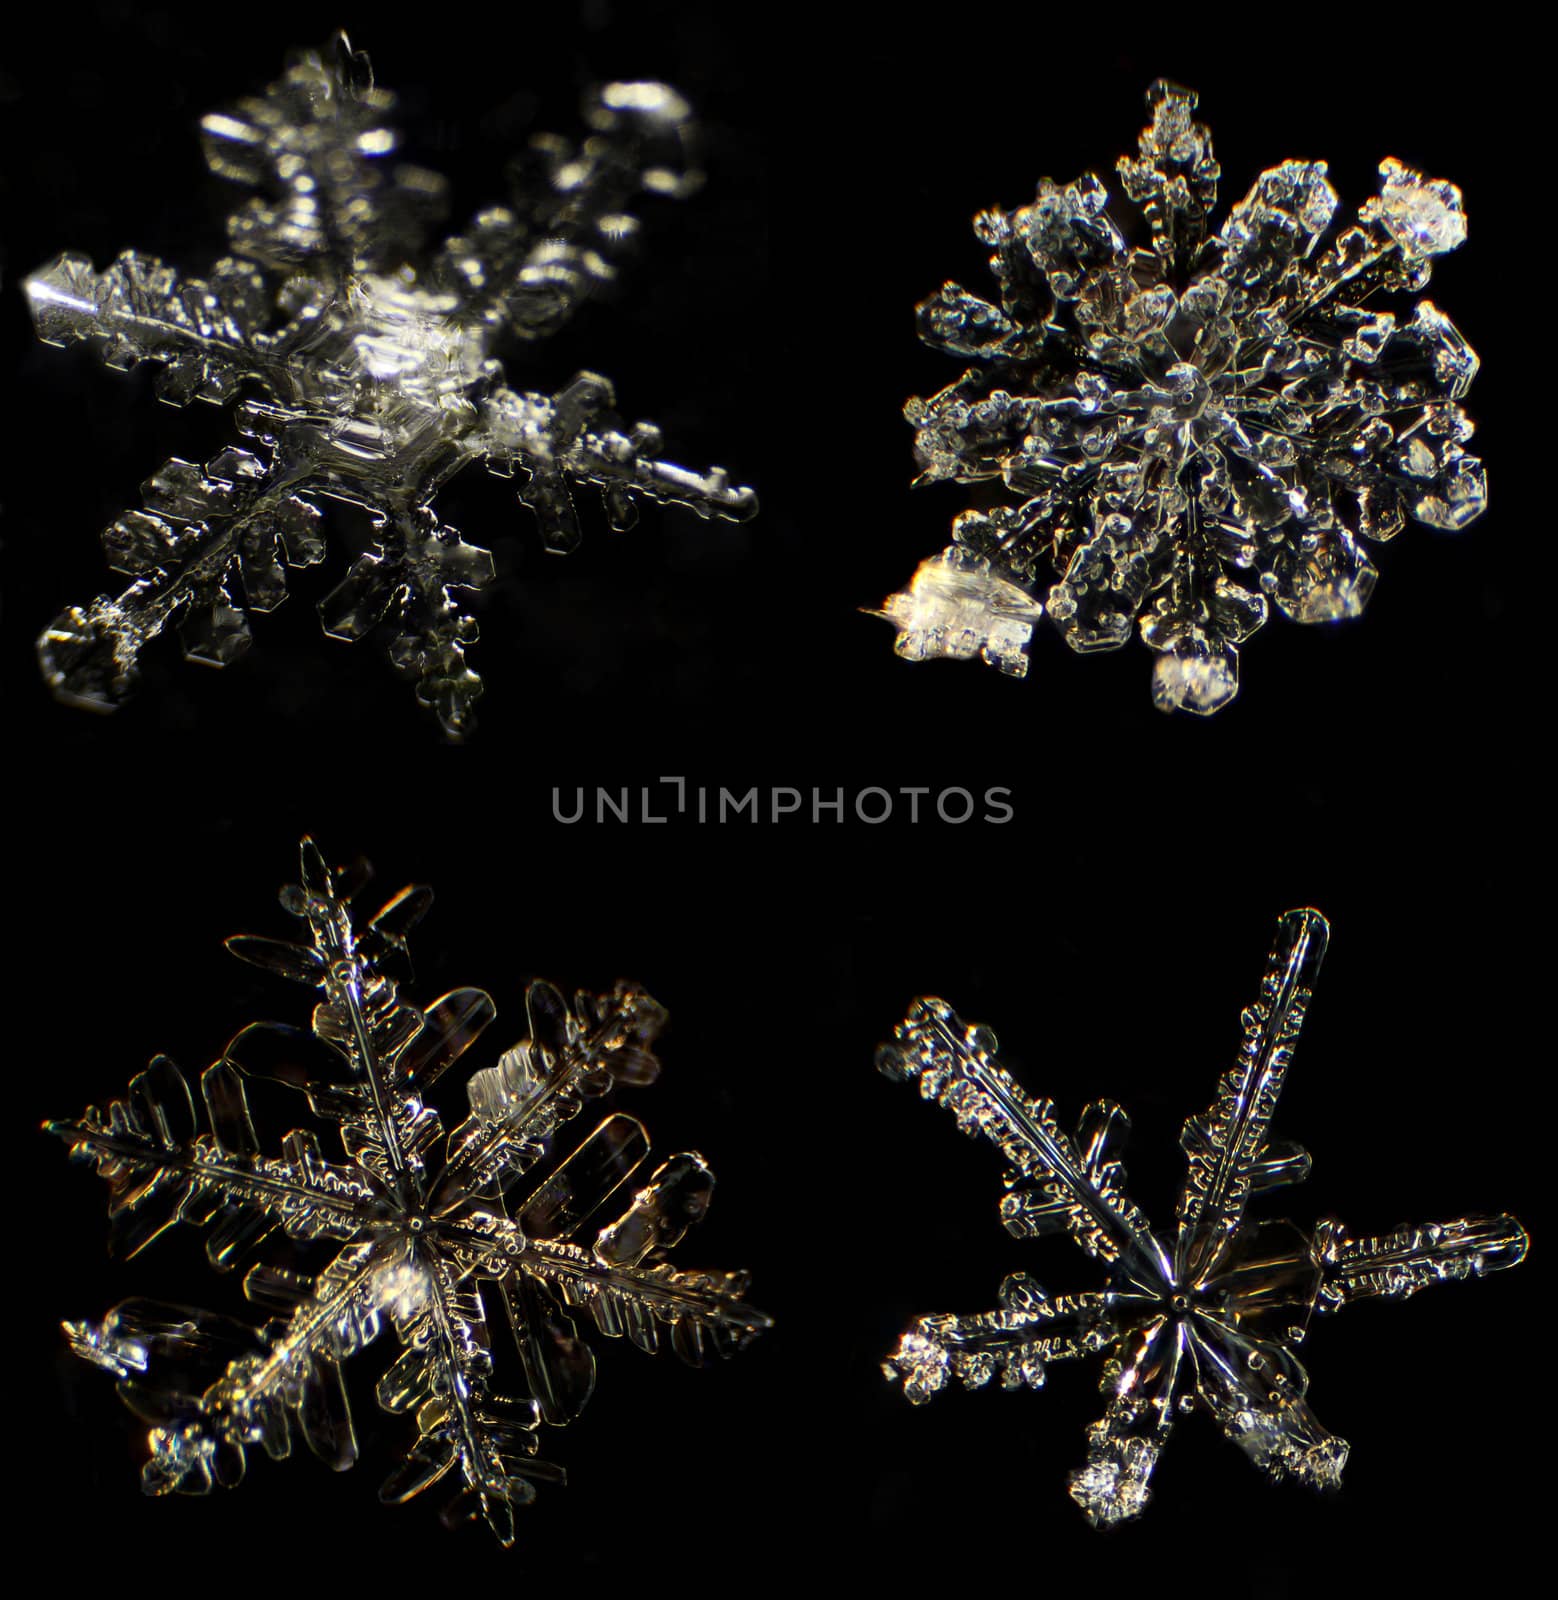 Snowflake under a microscope on the black background
